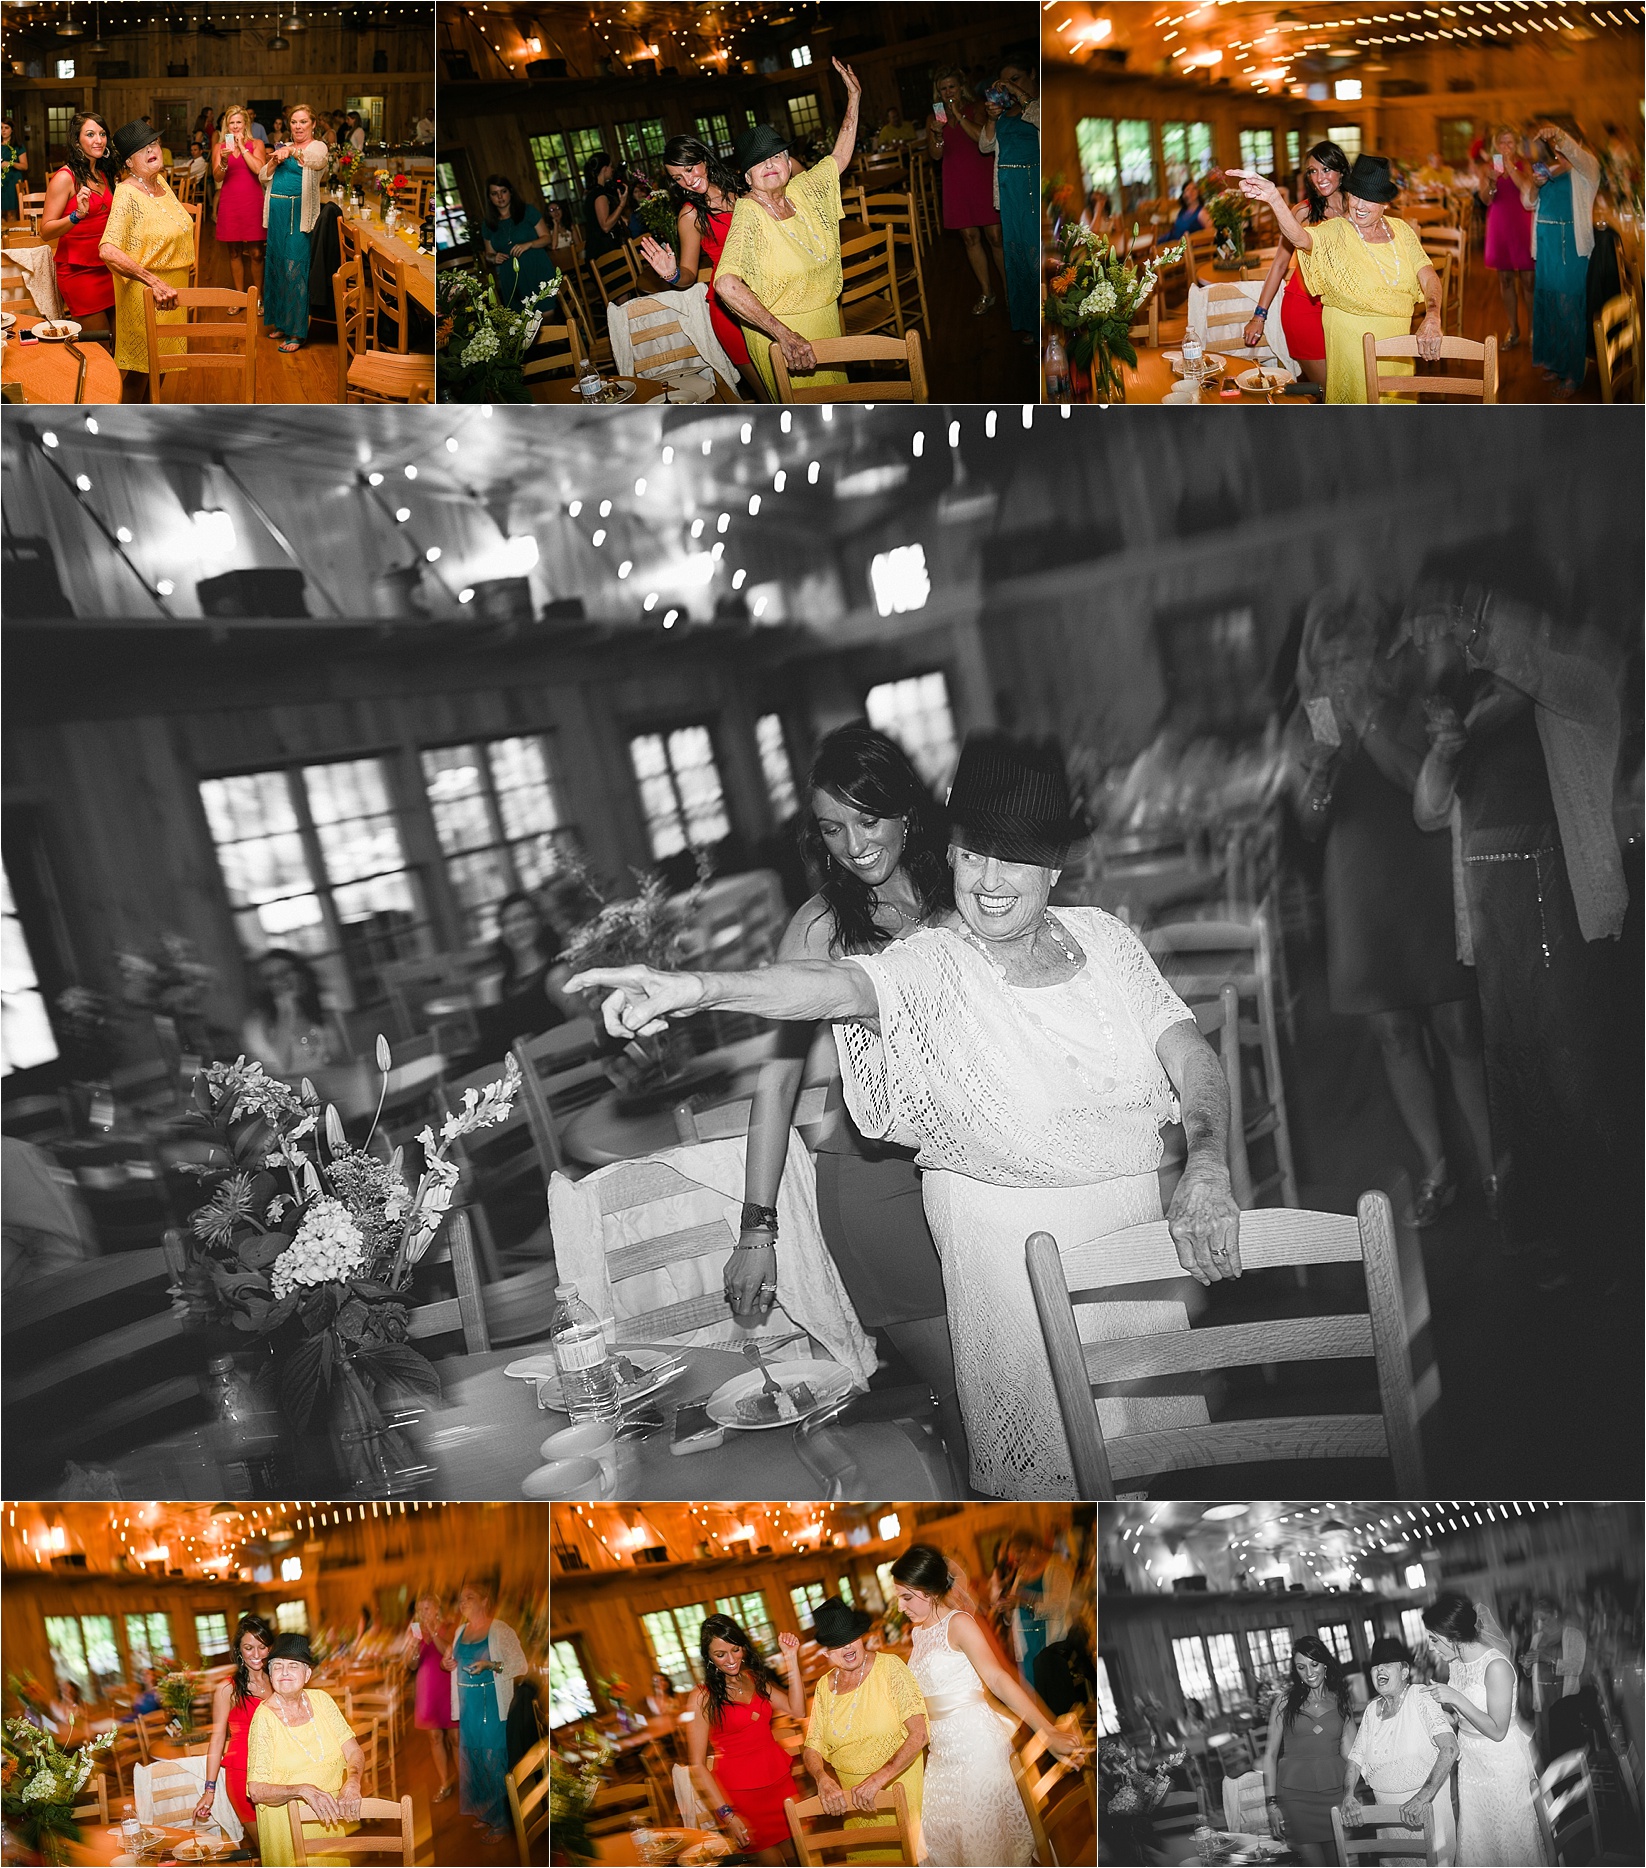 Grandma dancing to Michael jackson with shutter drag during the reception at Caroline and Evans mountain wedding at yesterday spaces in asheville leicester north carolina